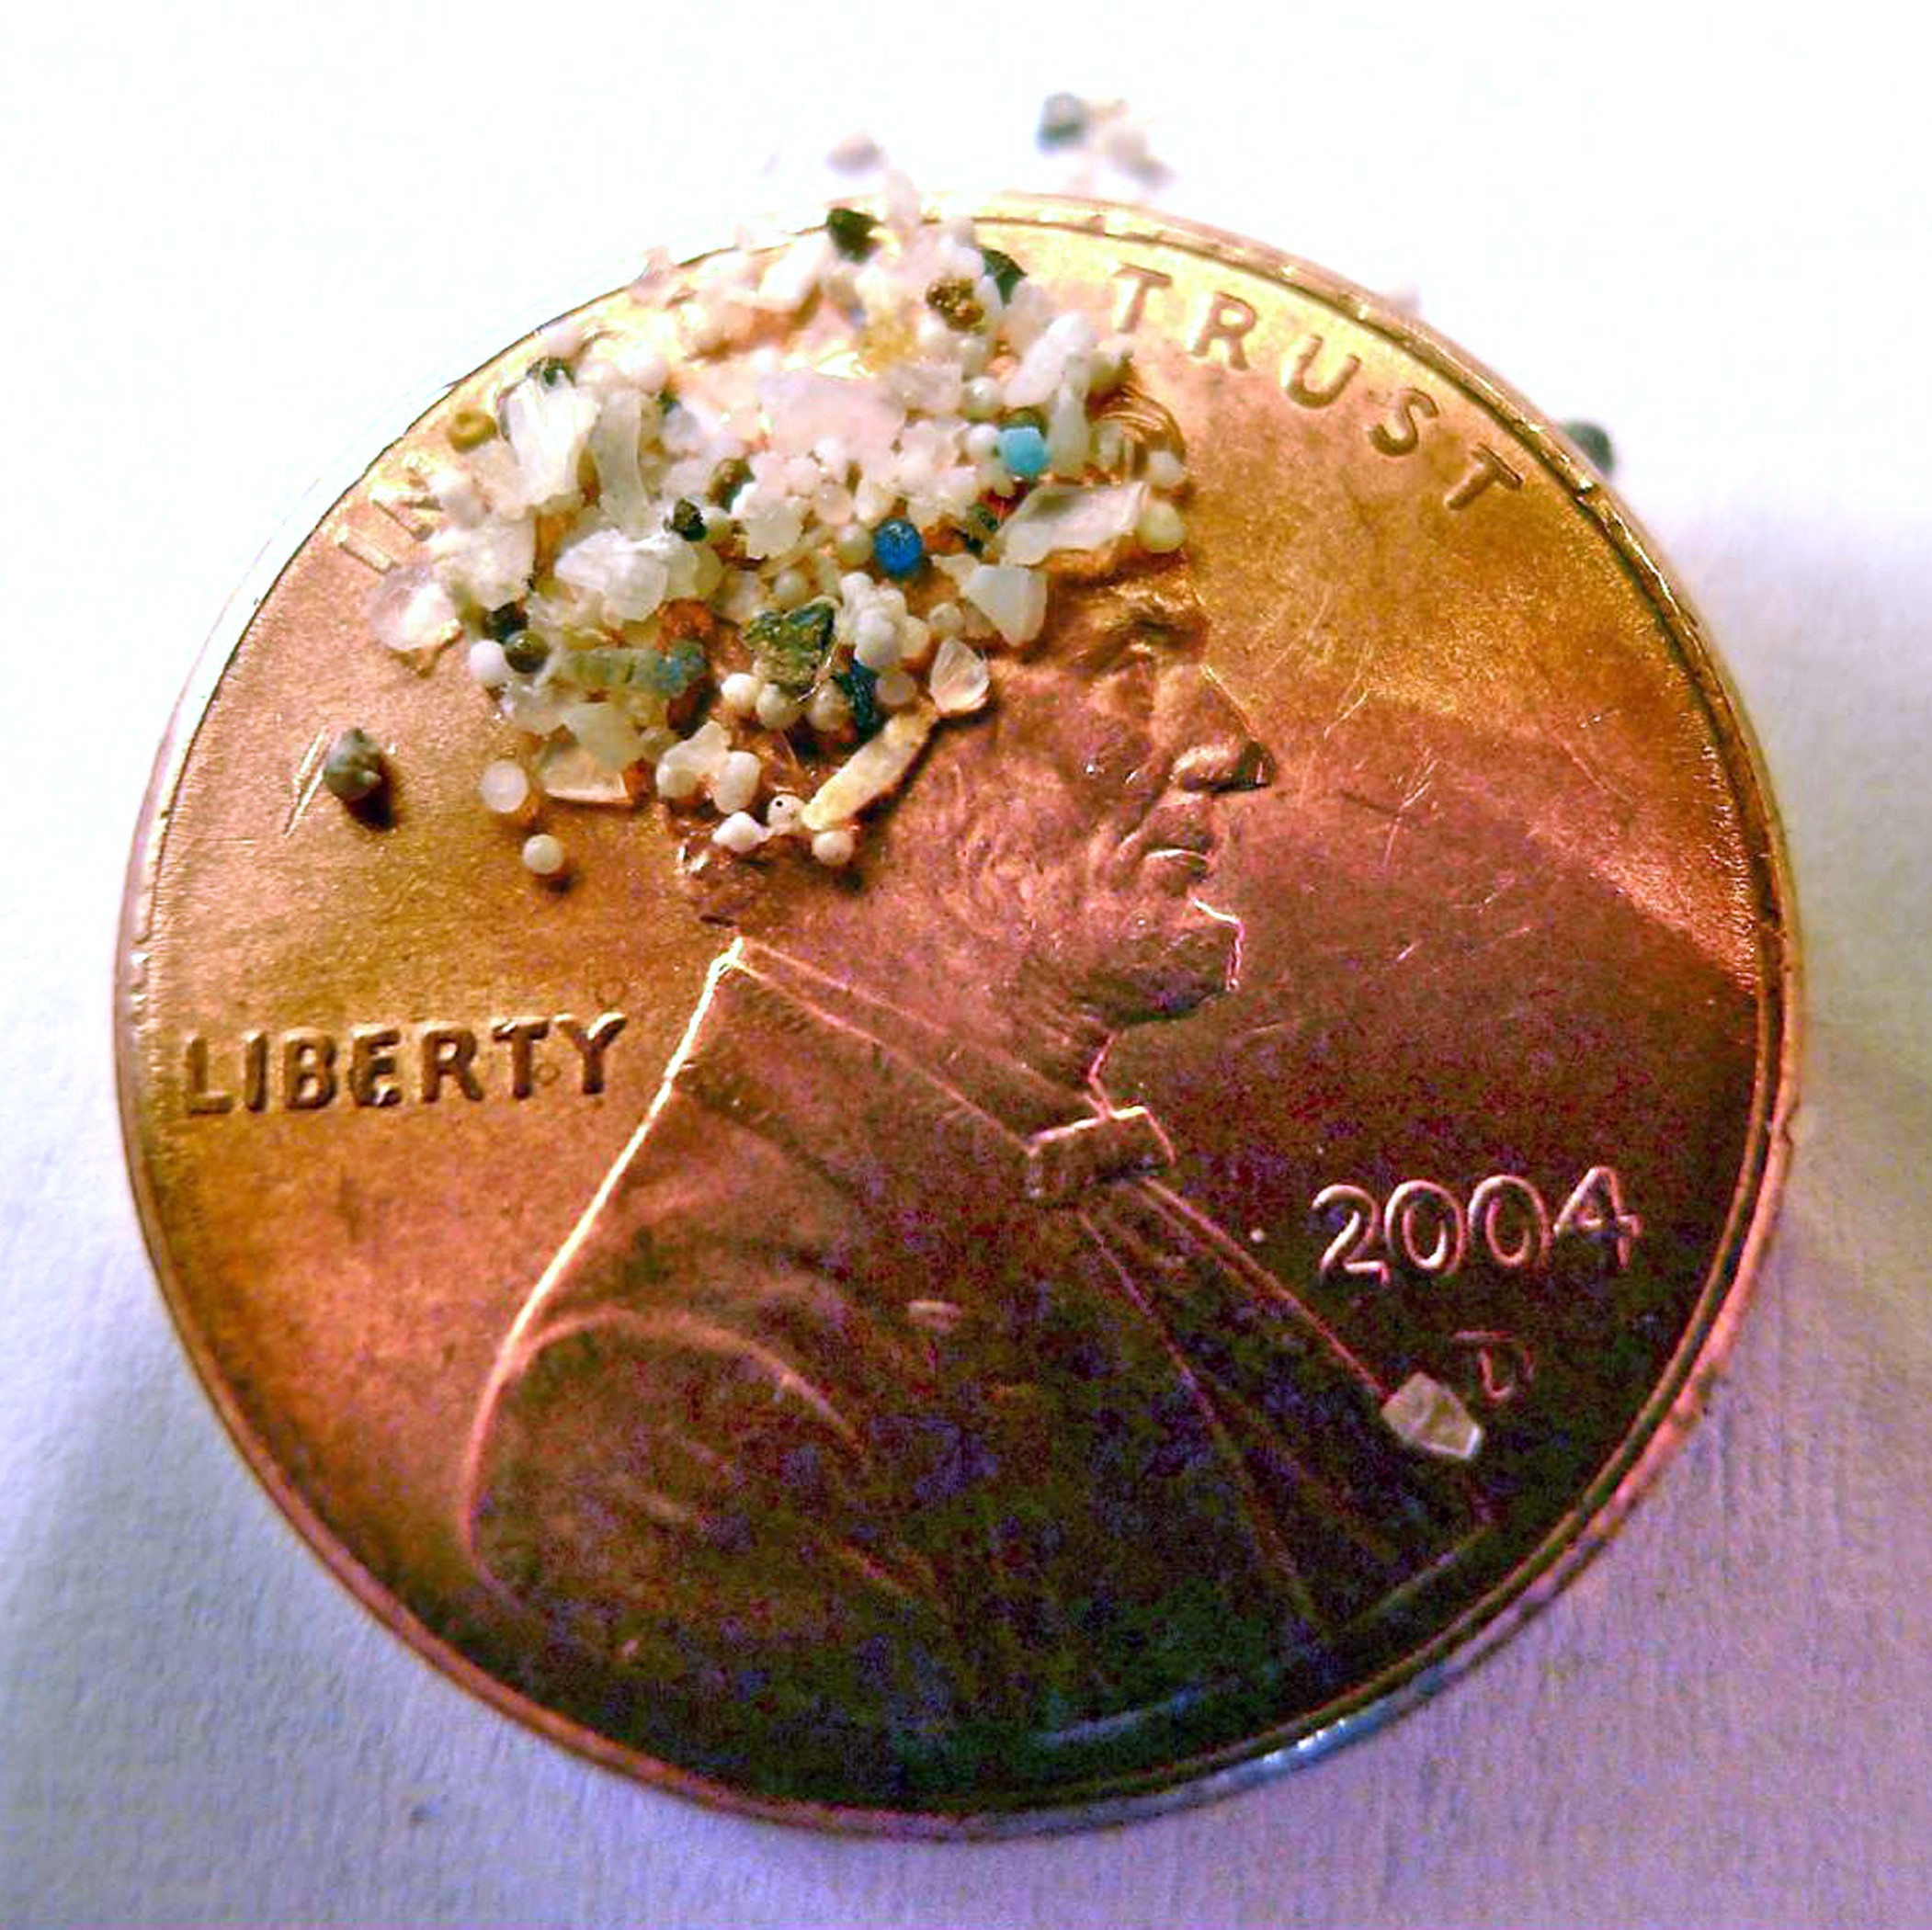 Do you use microbeads? Chances are, you do.